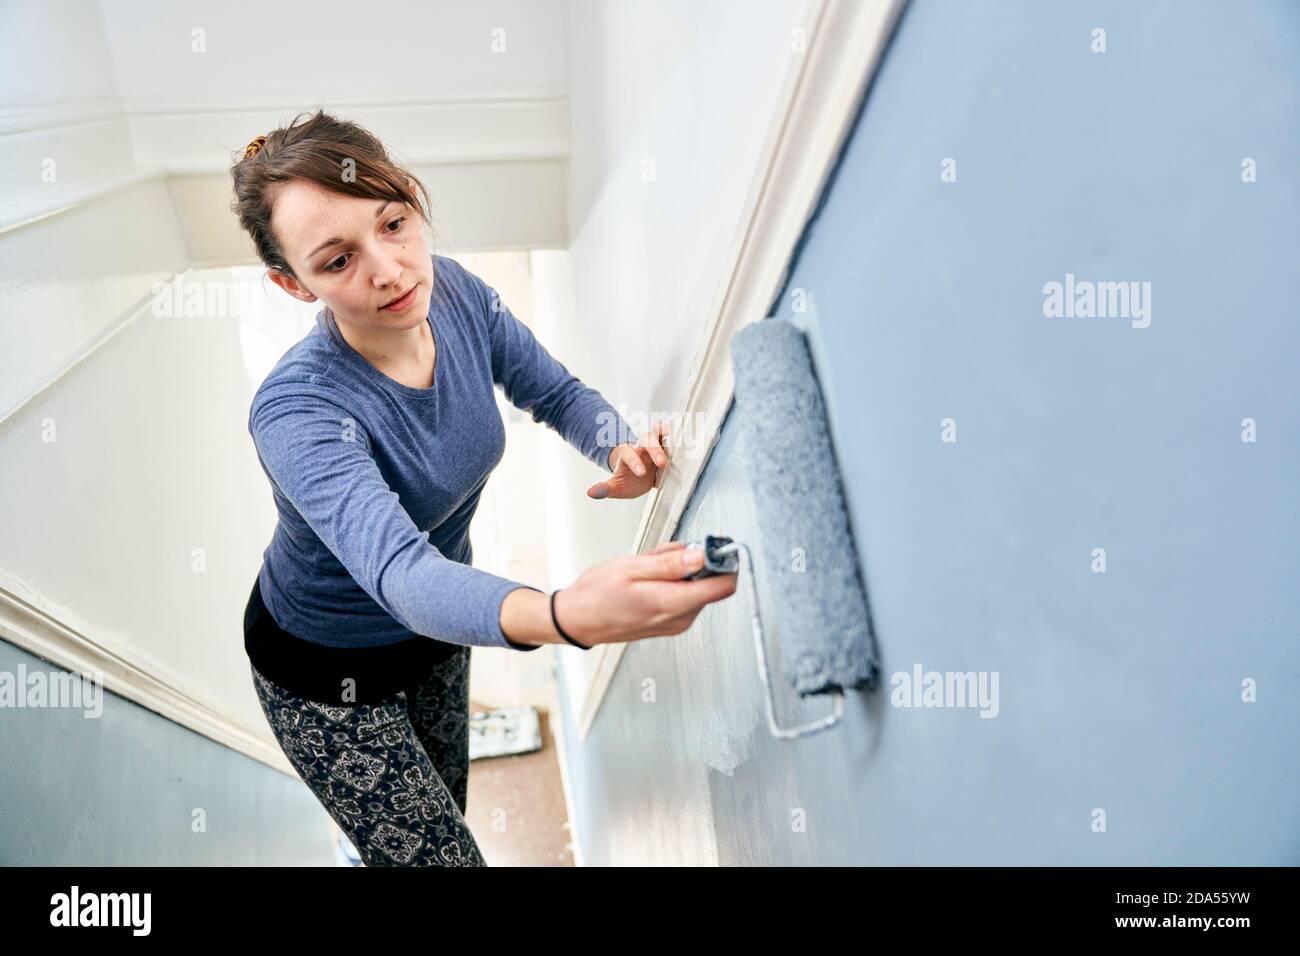 Woman using paint roller to paint staircase Stock Photo